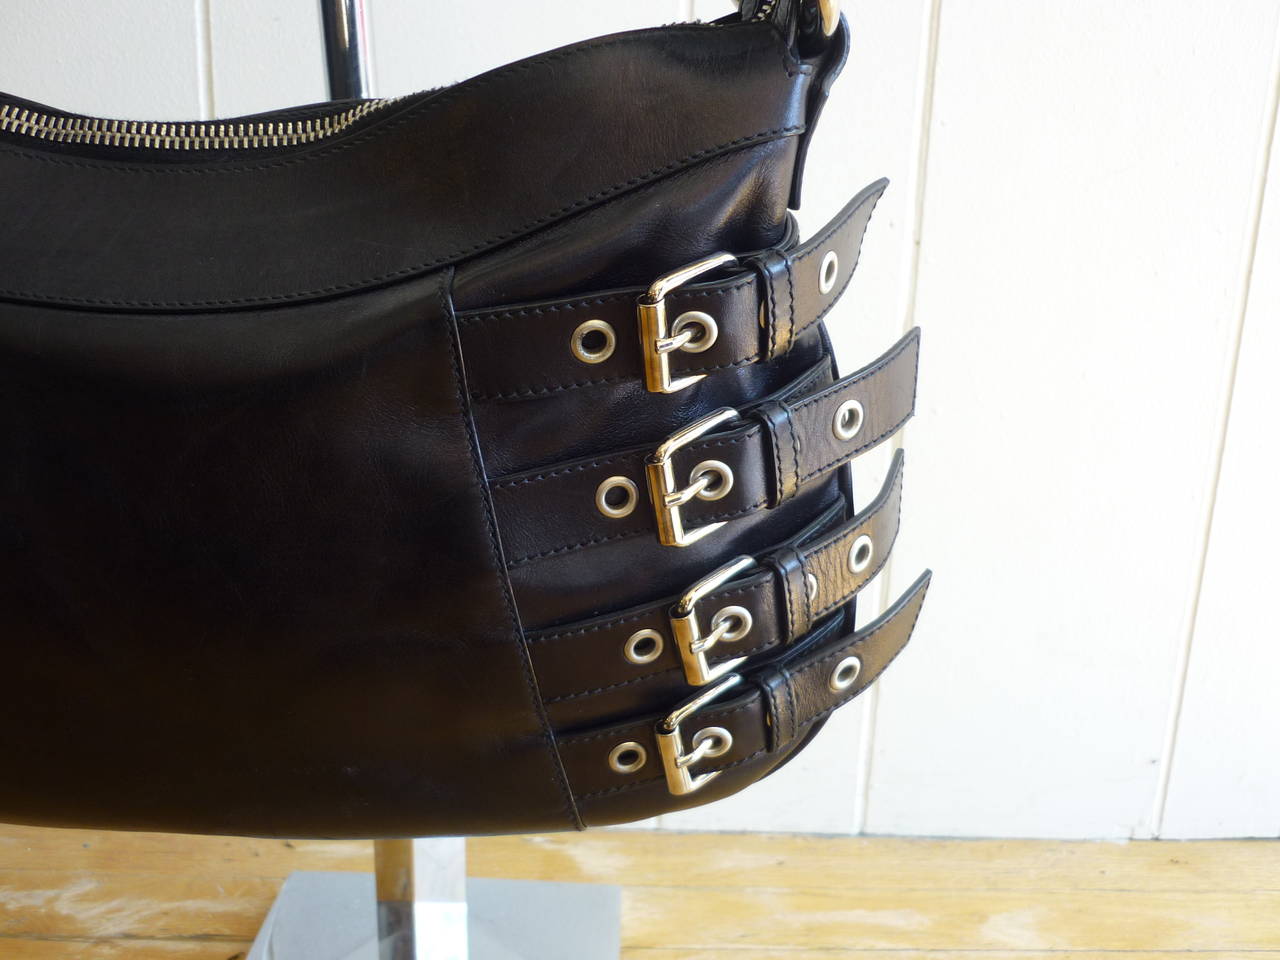 This handbag is repleat with silver tone hardware from the belt and buckle accents to the twin belt buckle shoulder straps which are adjustable. There is one interior zip pocket.

Mid-size handbag for any outfit from motorcycle gear to something